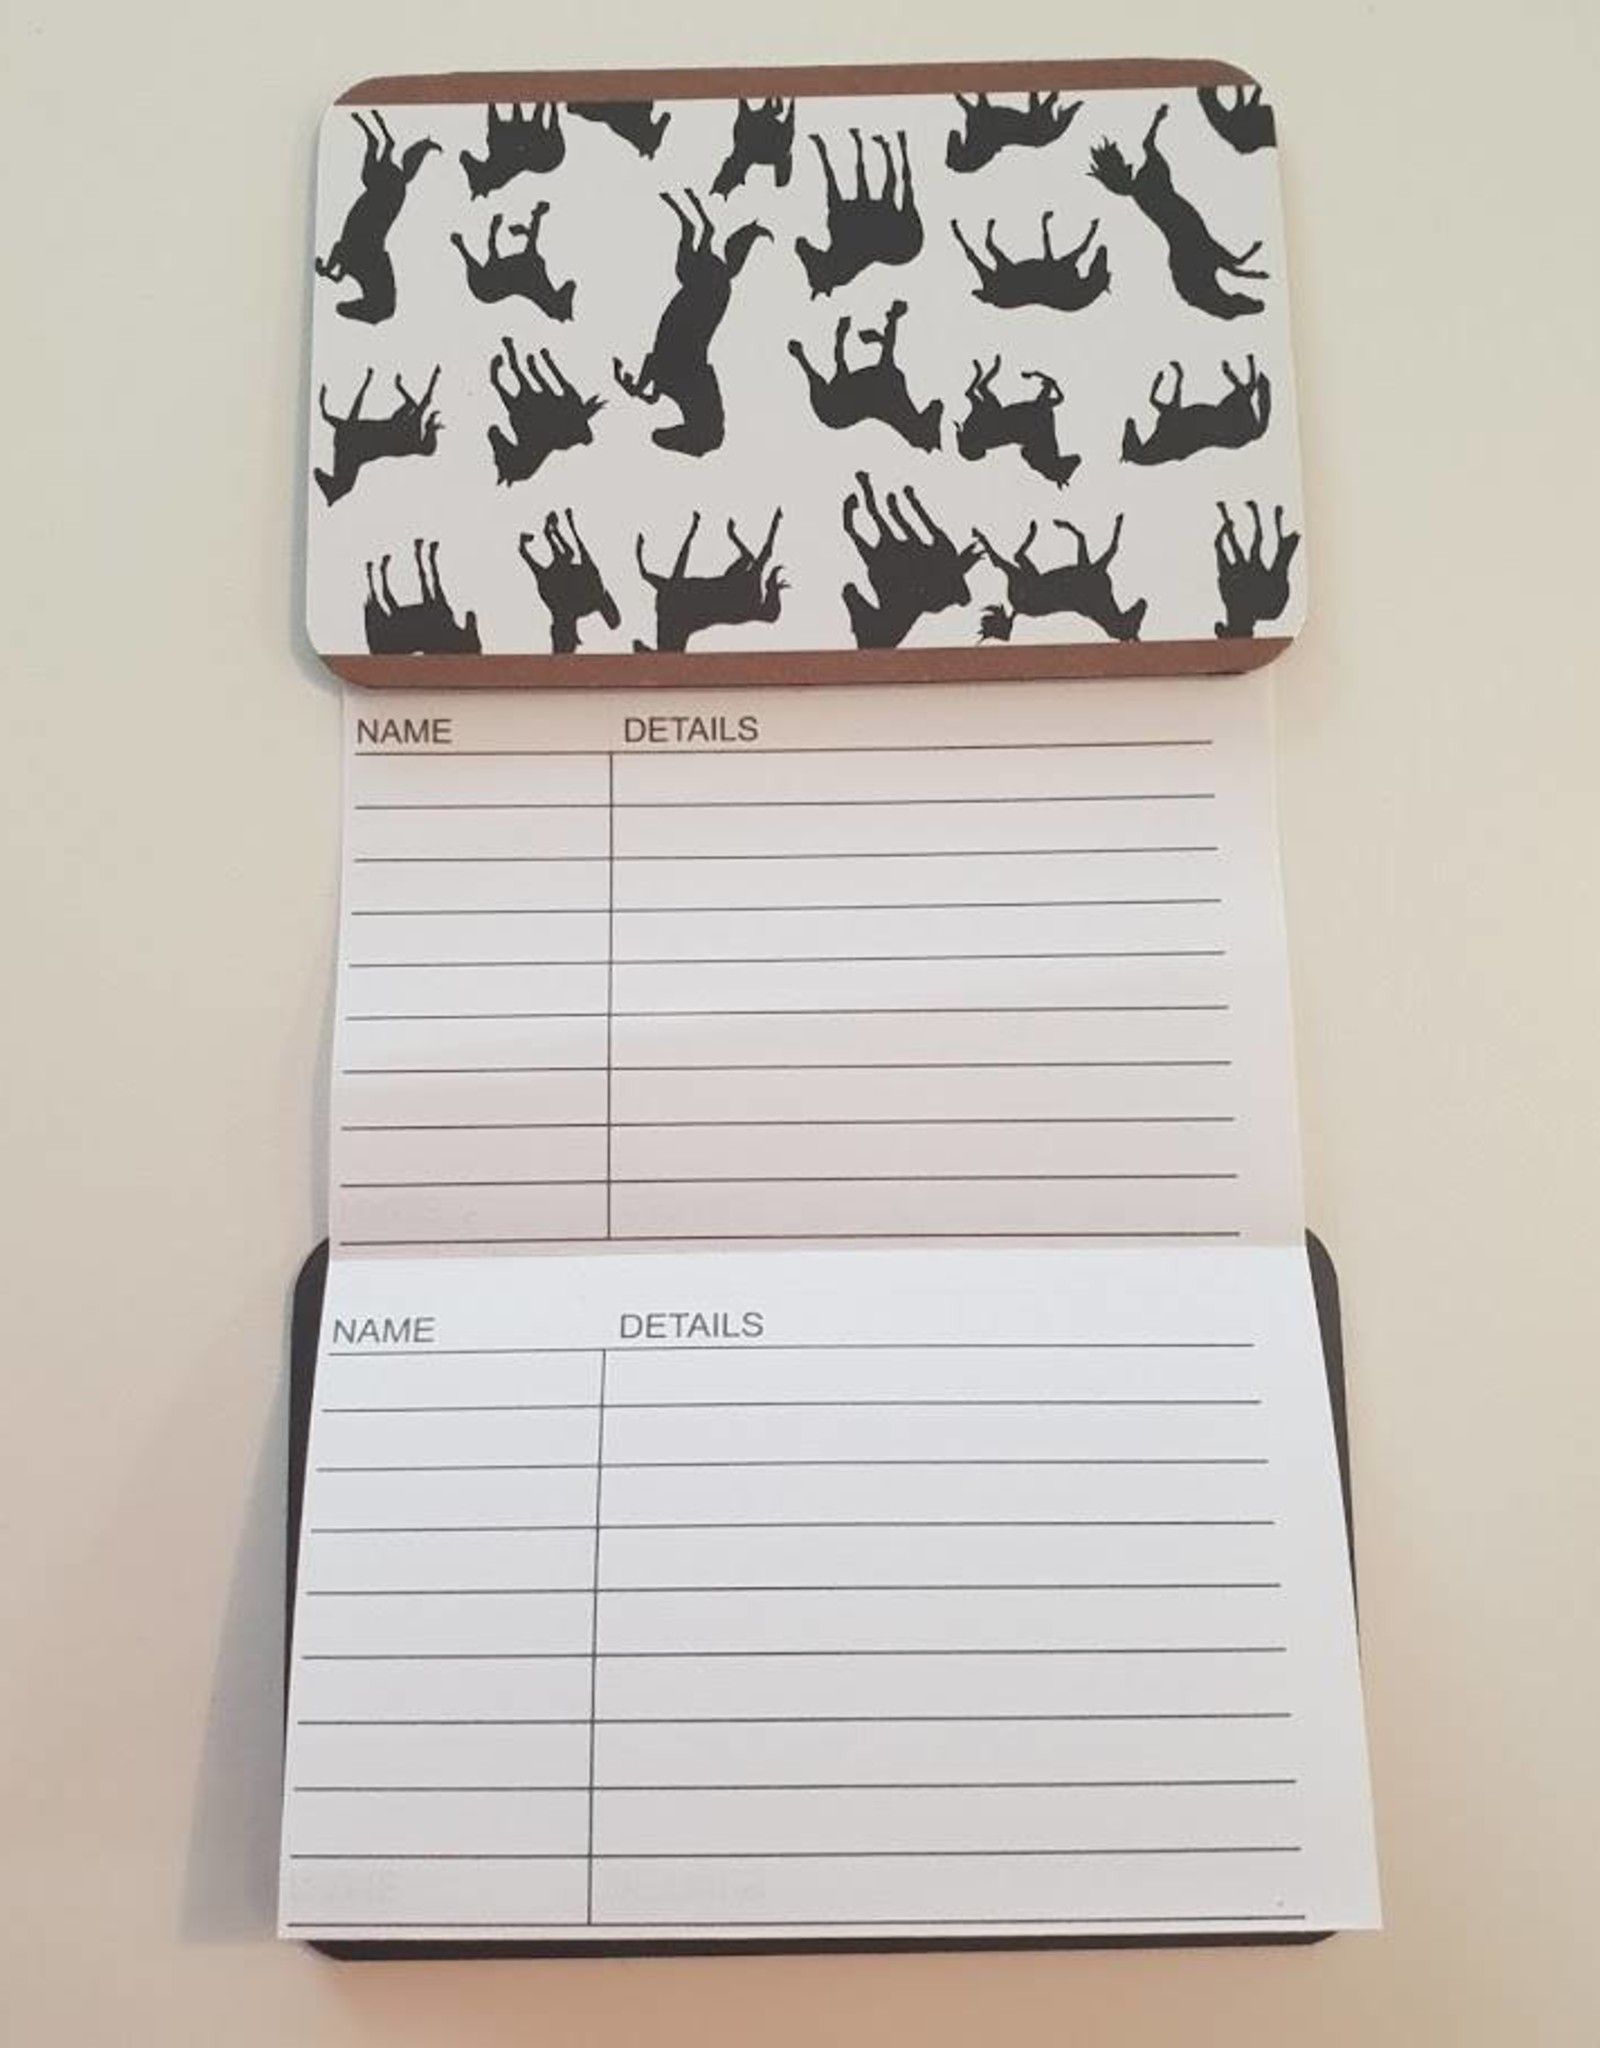 Magnetic Address Book with Horses on cover